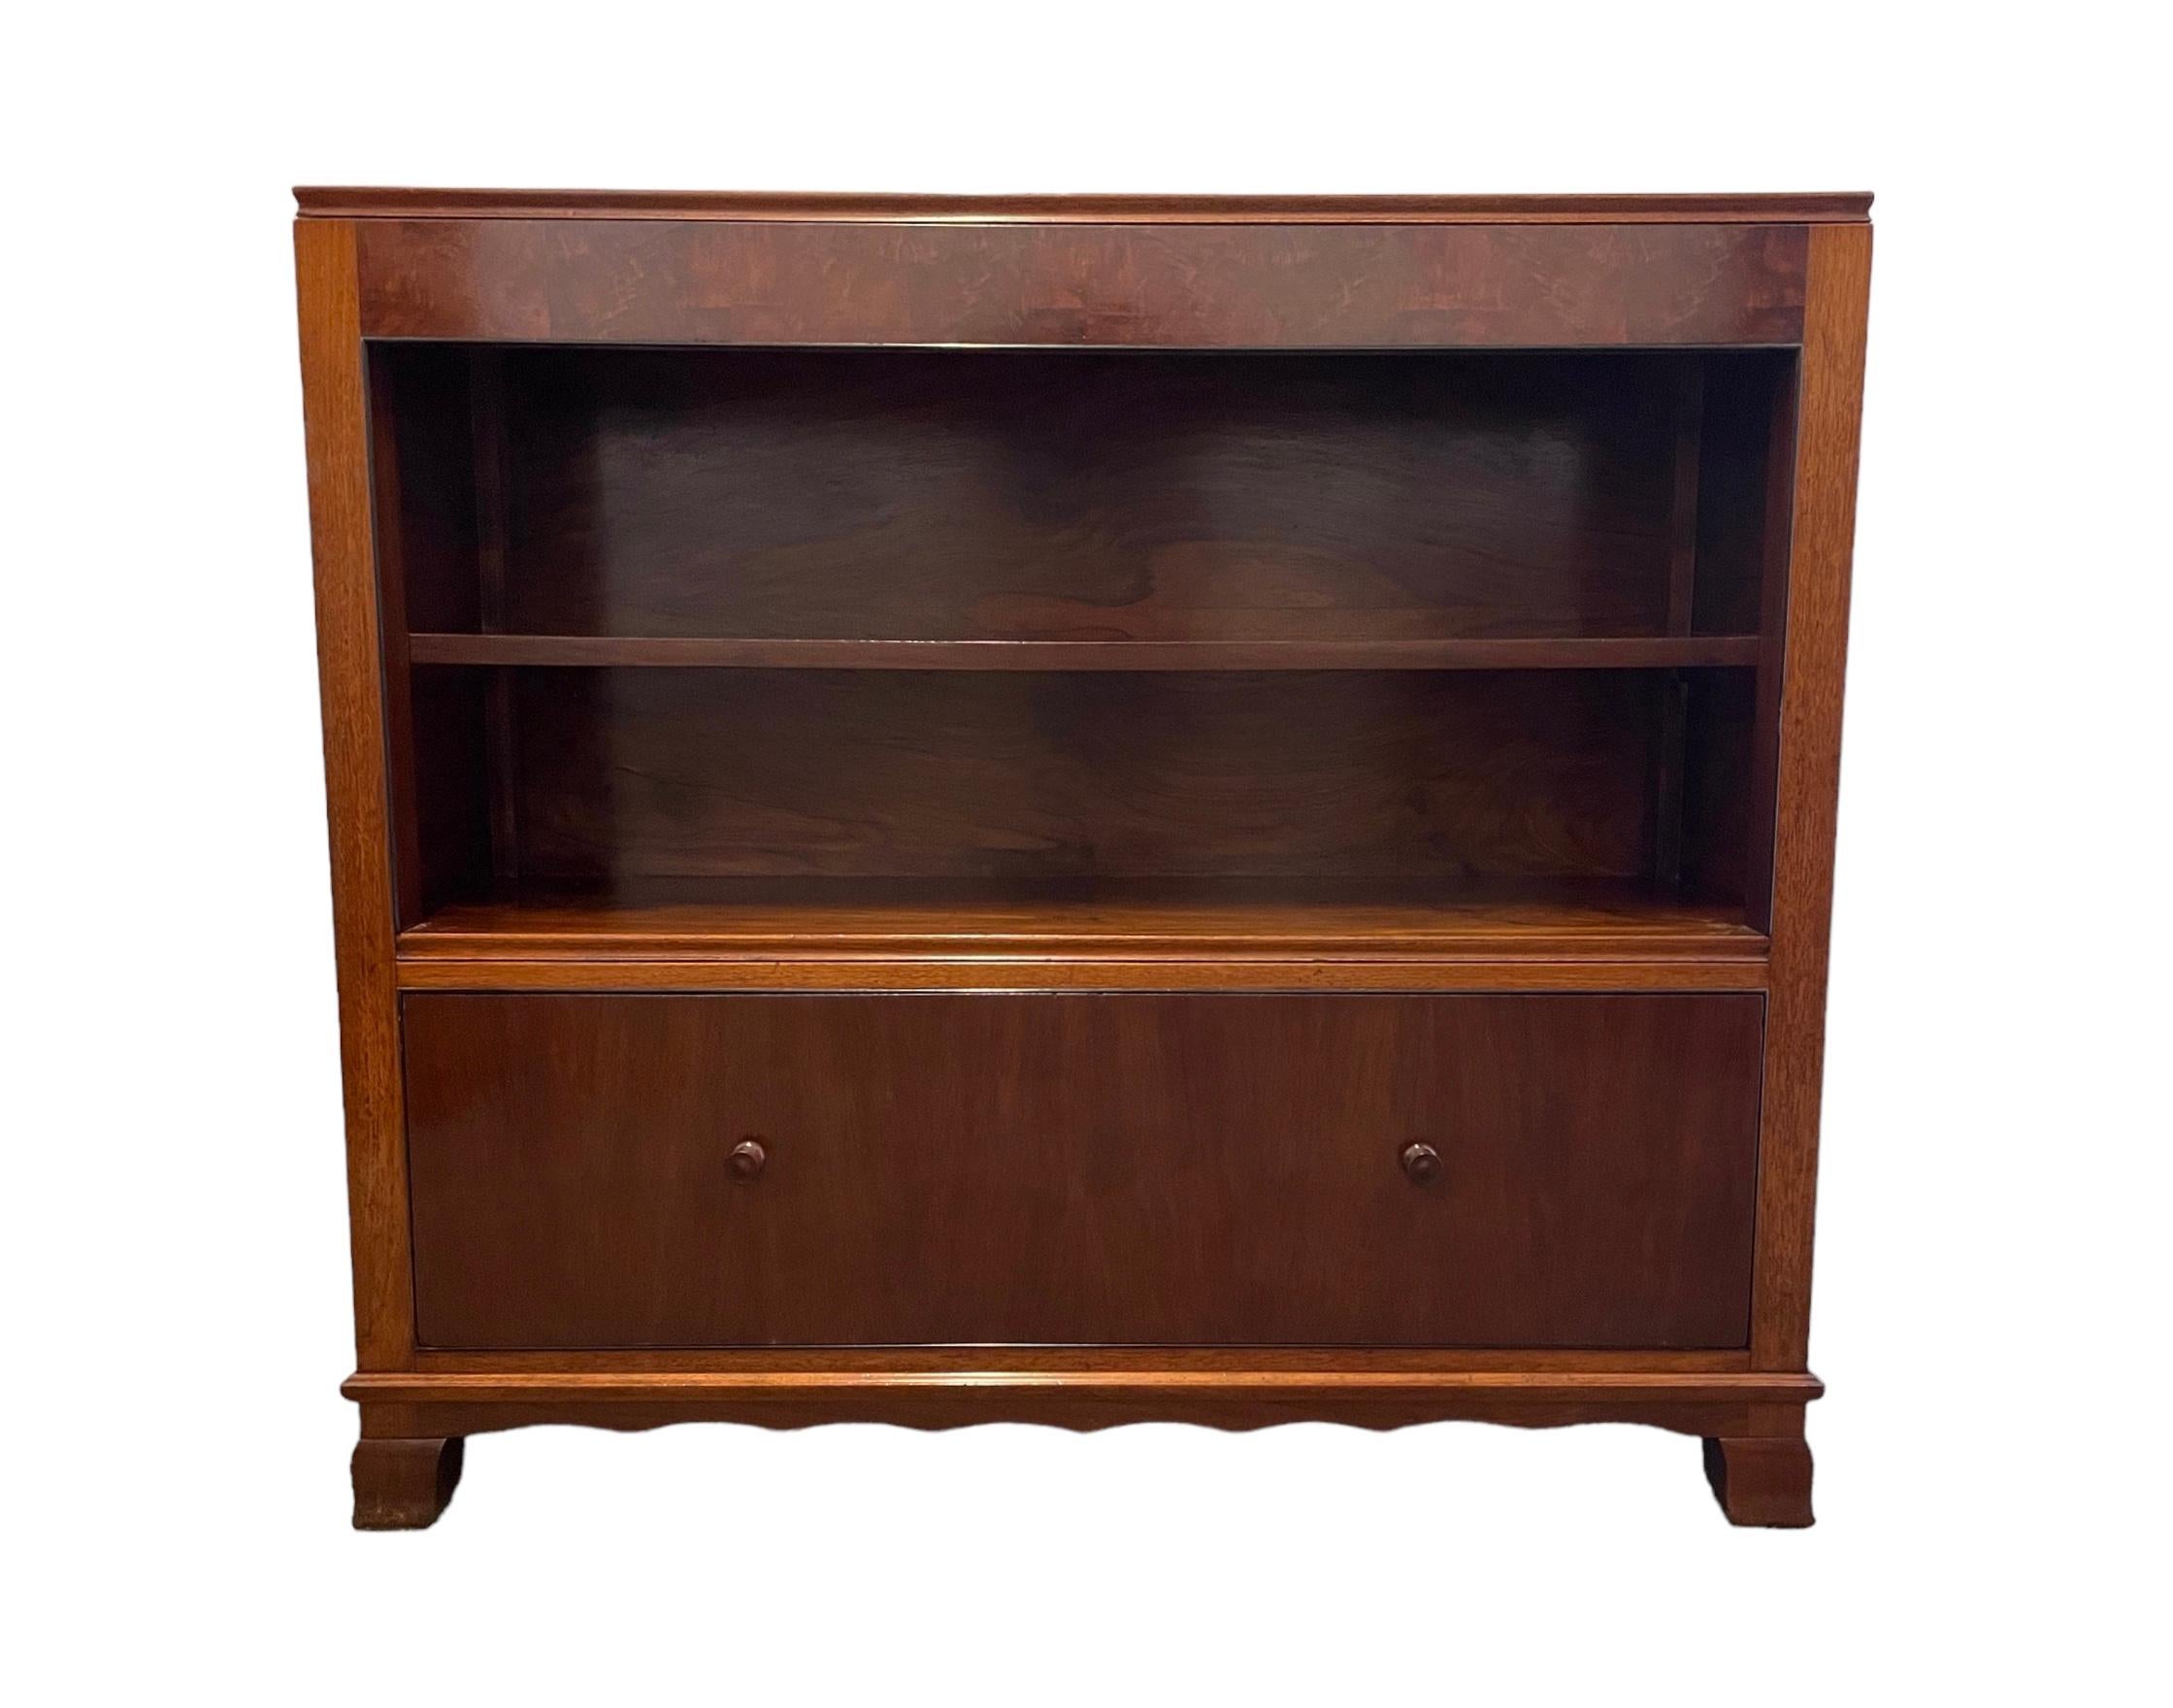 British Art Deco Bookcase by Maurice Adams For Sale